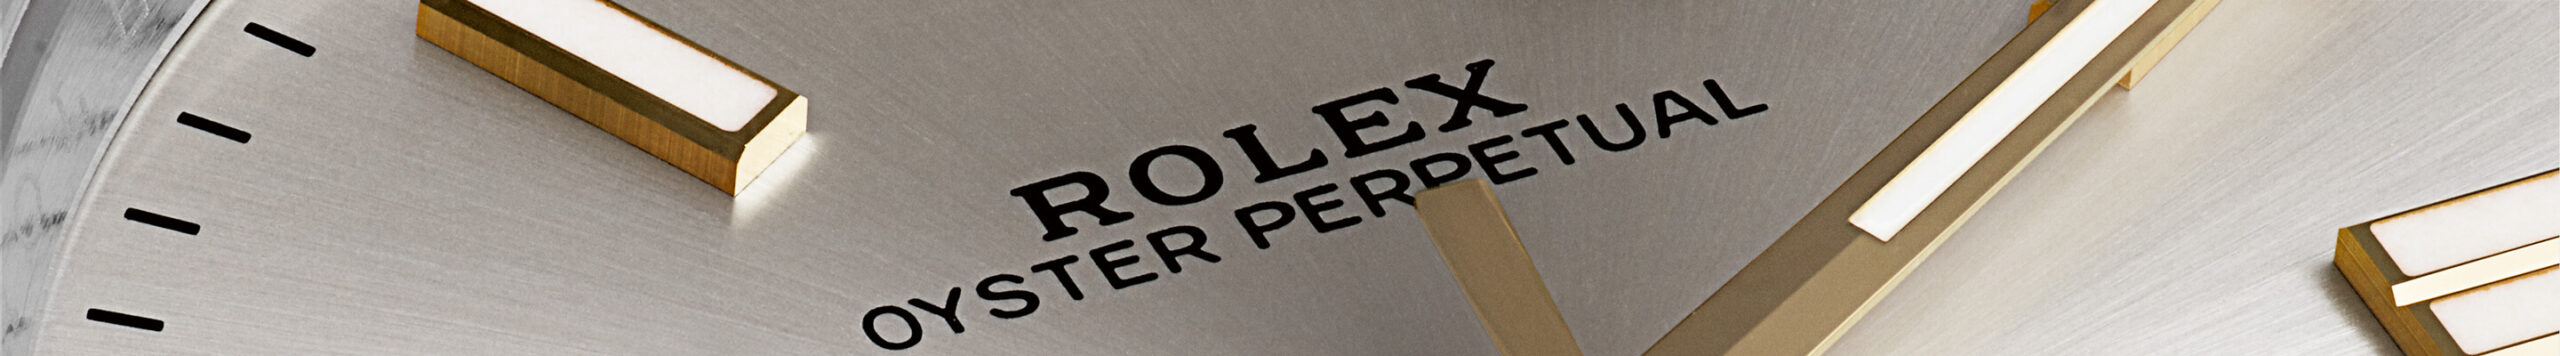 Close-up of a Rolex Oyster Perpetual watch face showing the brand name and gold hour markers.